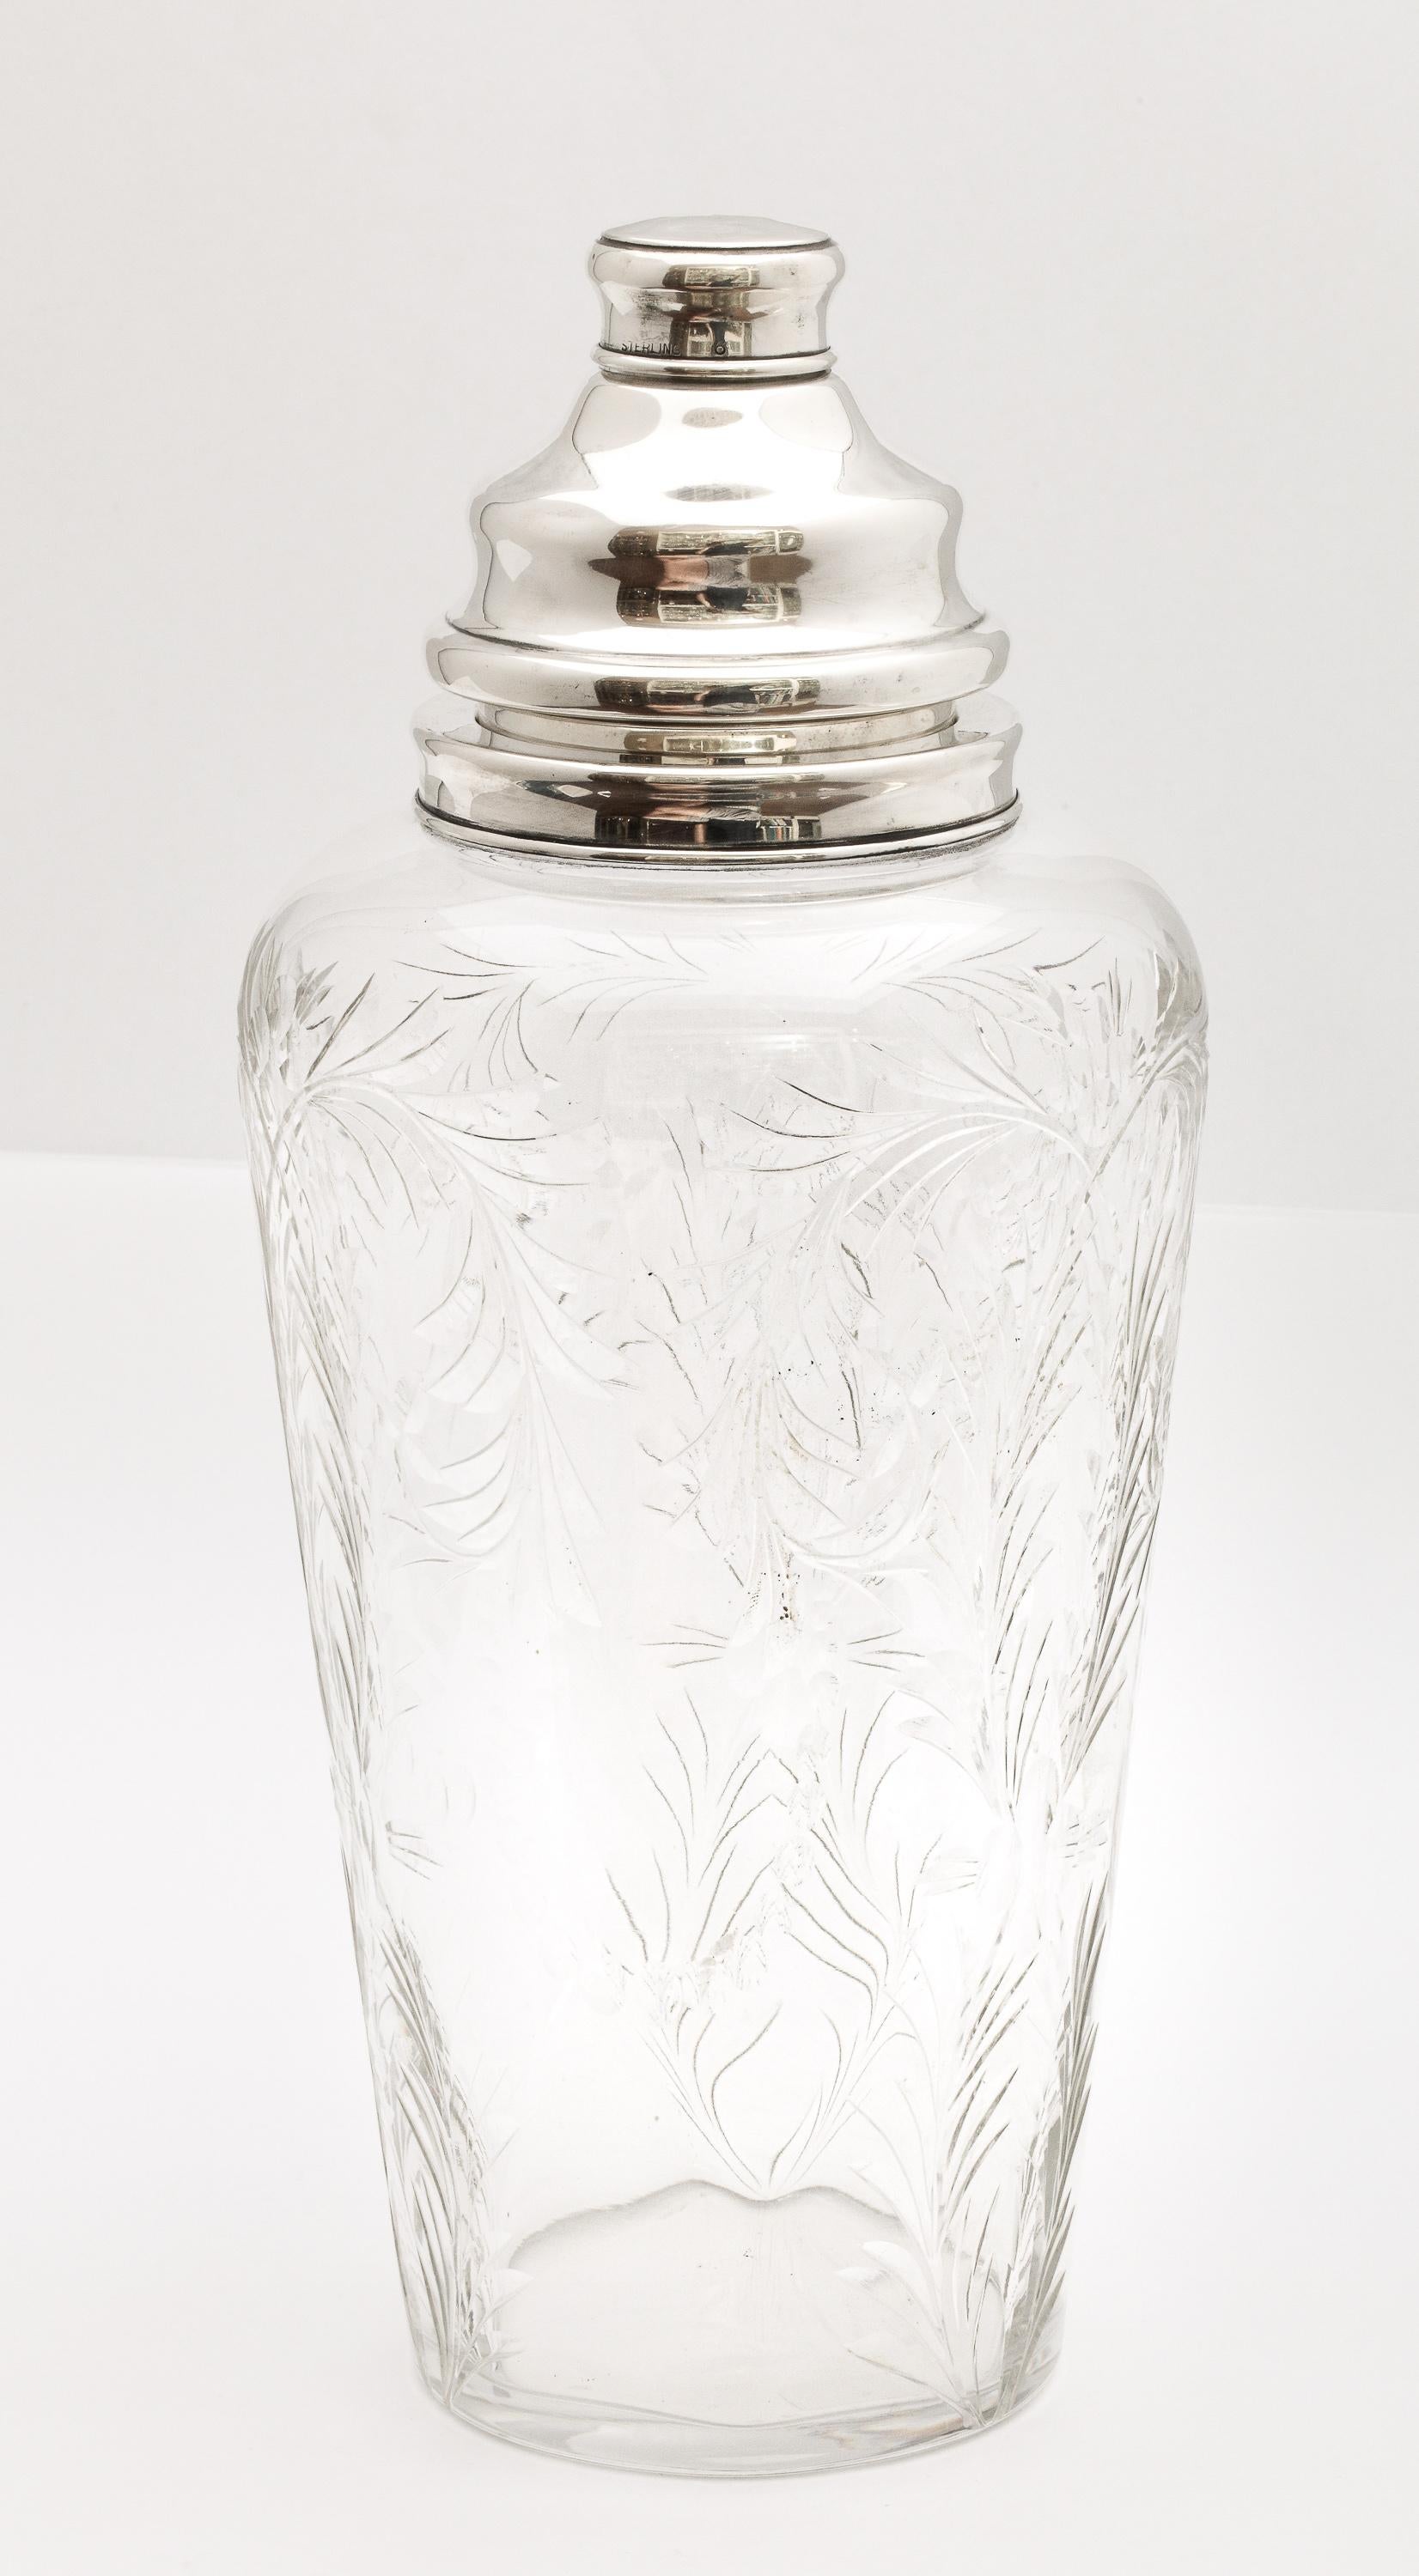 Art Deco Sterling Silver-Mounted Cocktail Shaker by Hawkes 2